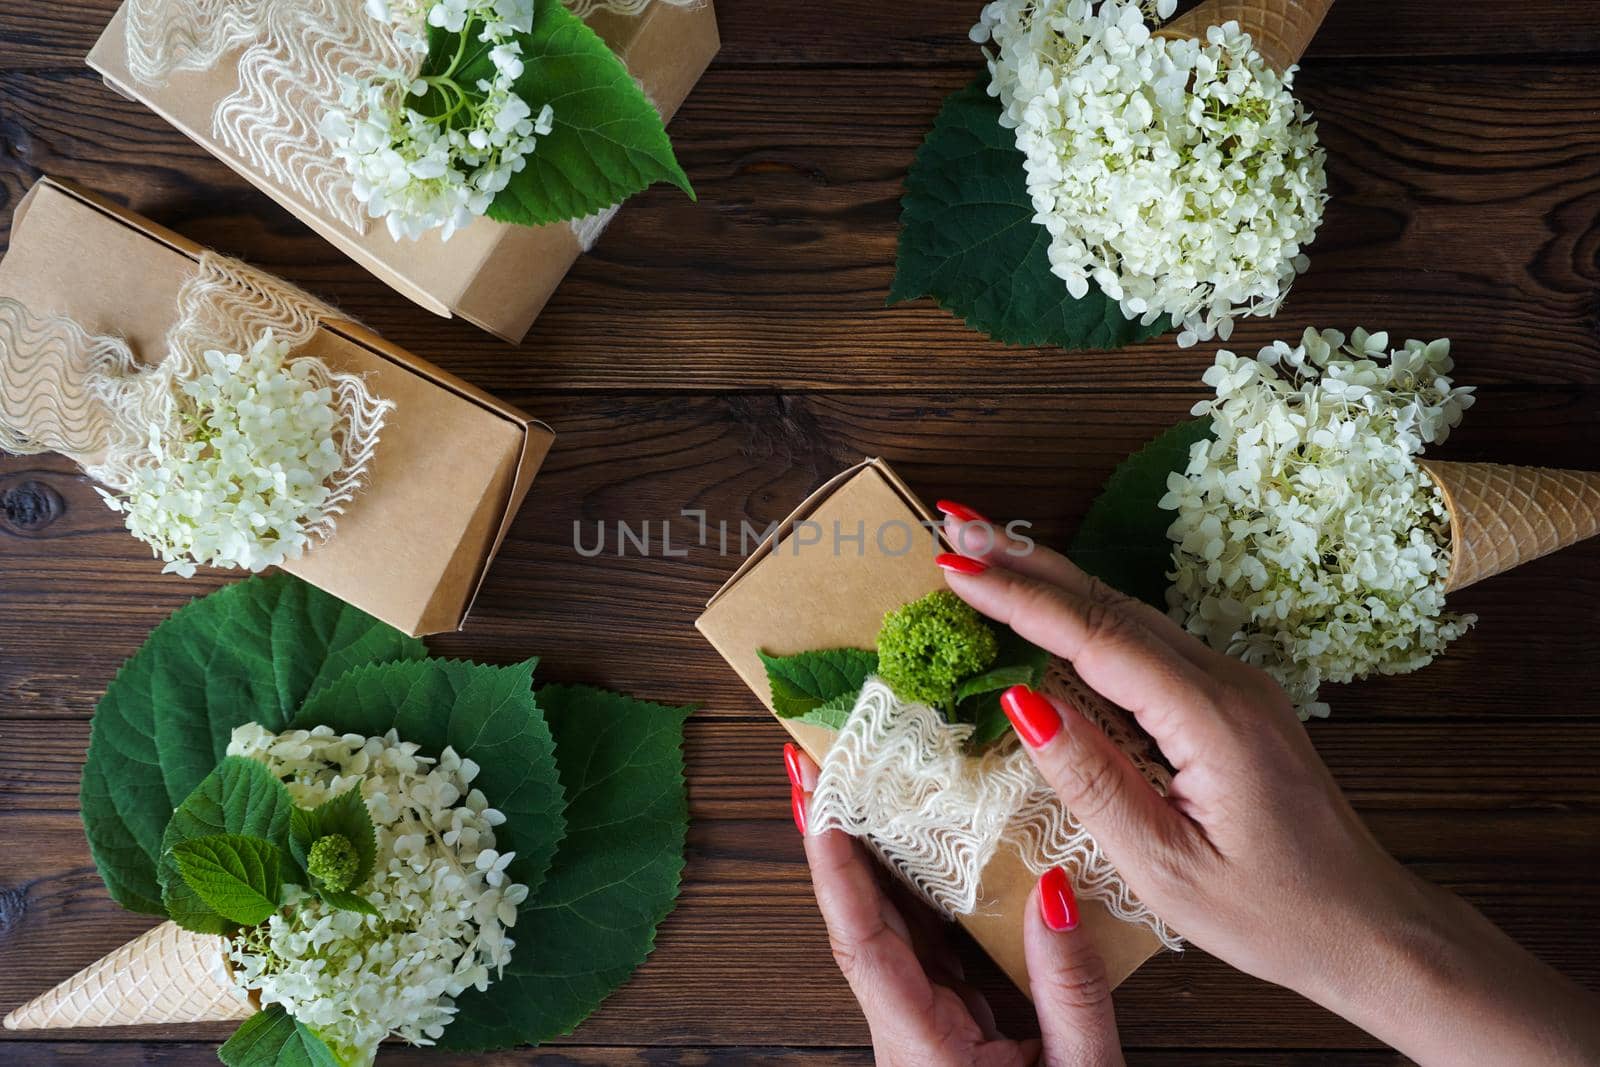 Women's hands pack a gift in a craft box with hydrangea flowers by Spirina